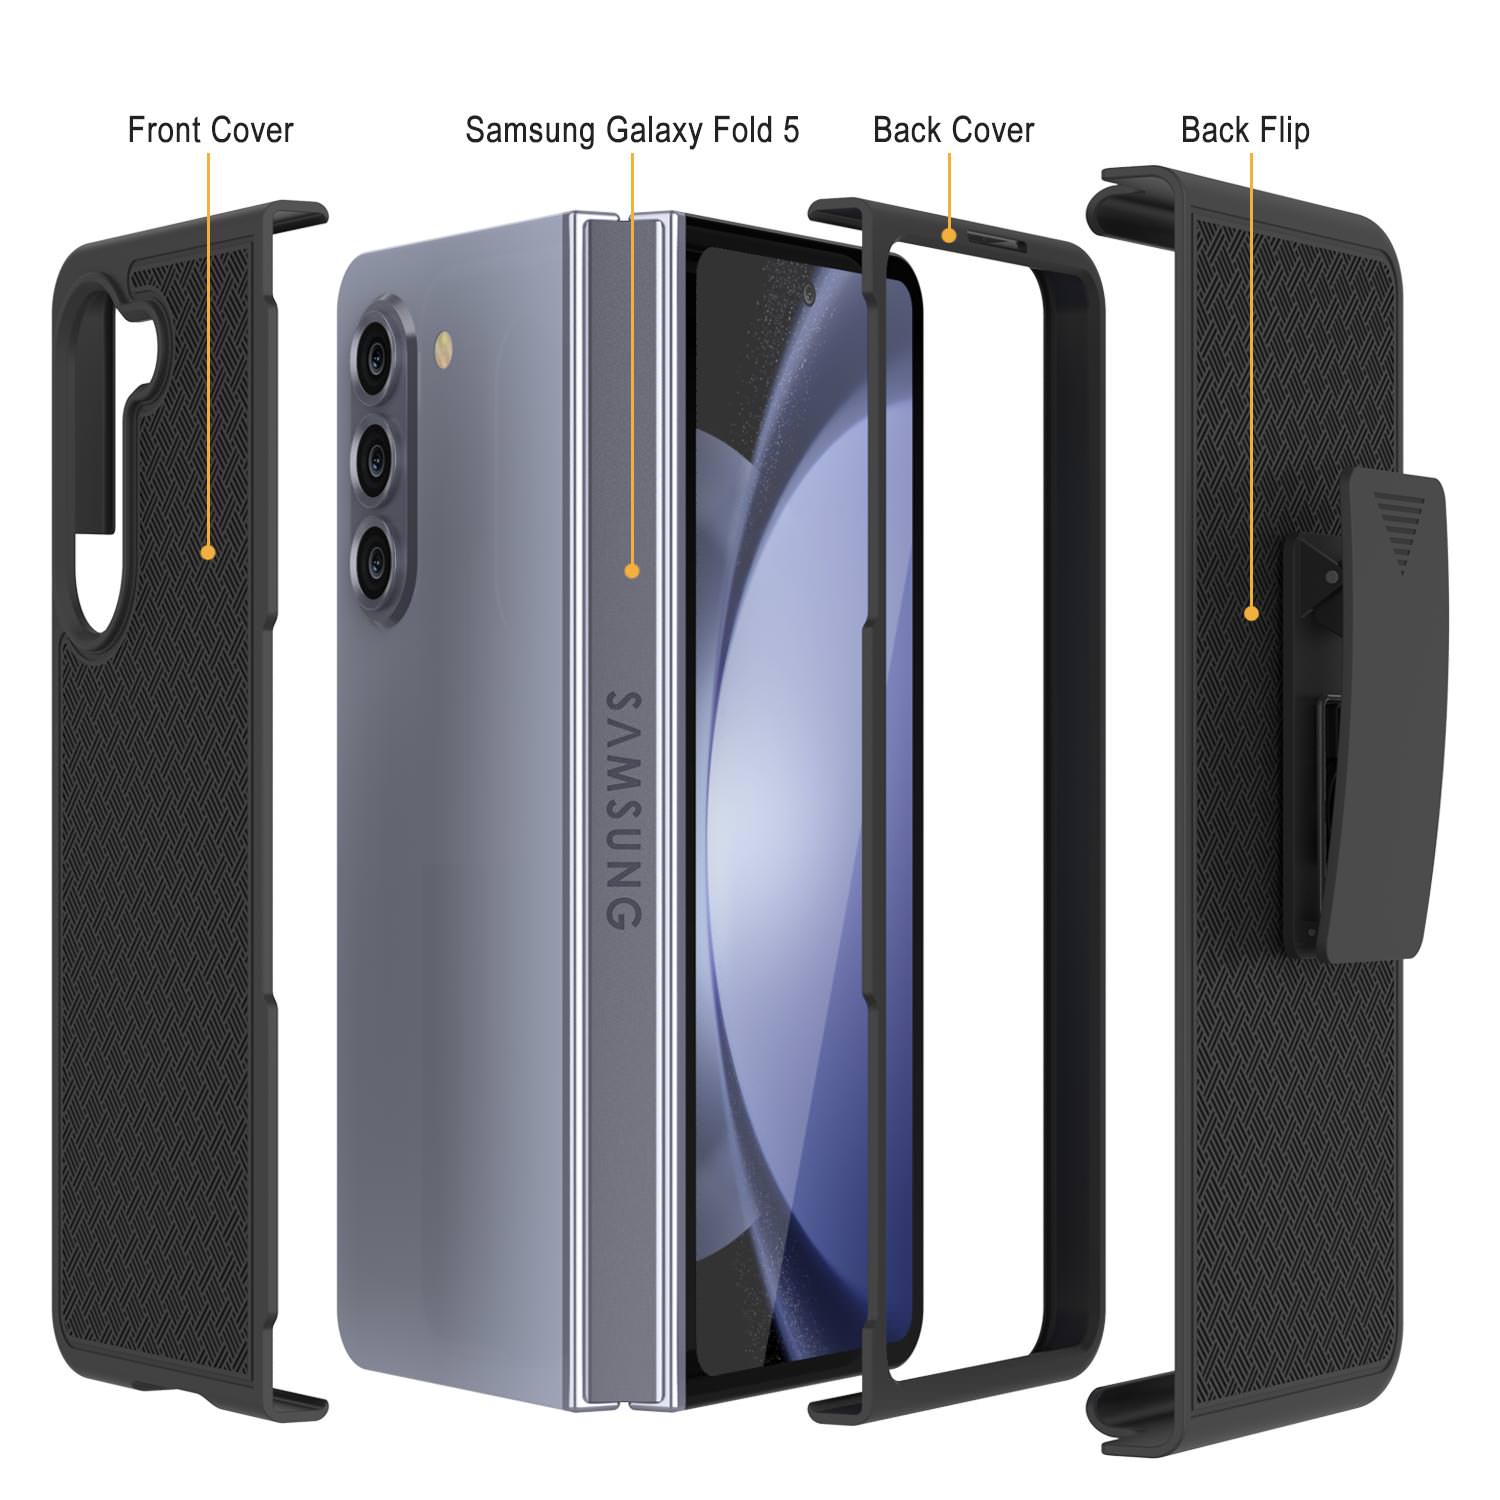 Galaxy Z Fold5 Case With Tempered Glass Screen Protector, Holster Belt Clip & Built-In Kickstand [Black]